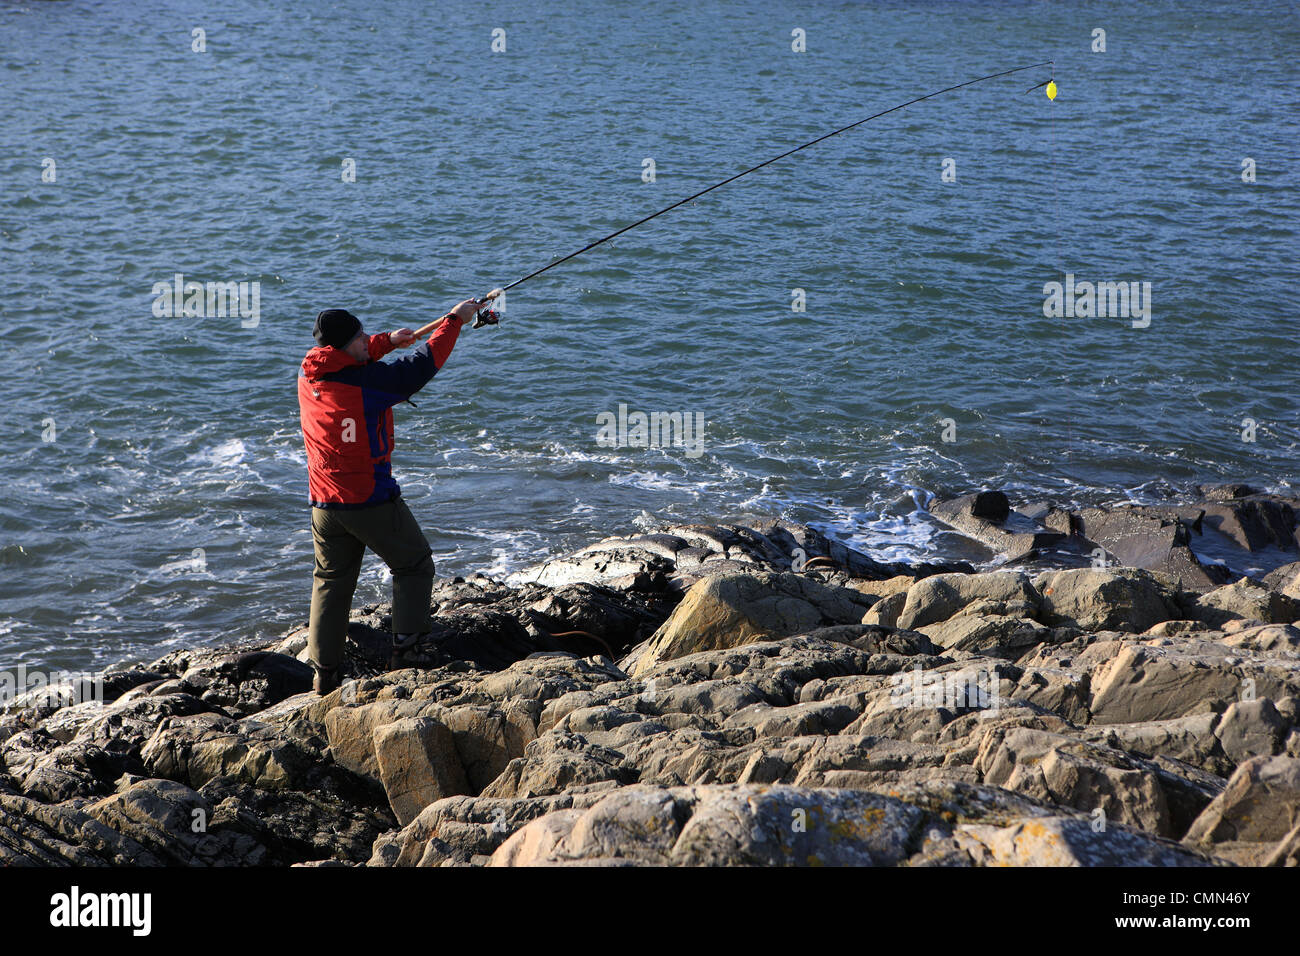 Man casting a fishing rod at the waters edge Stock Photo